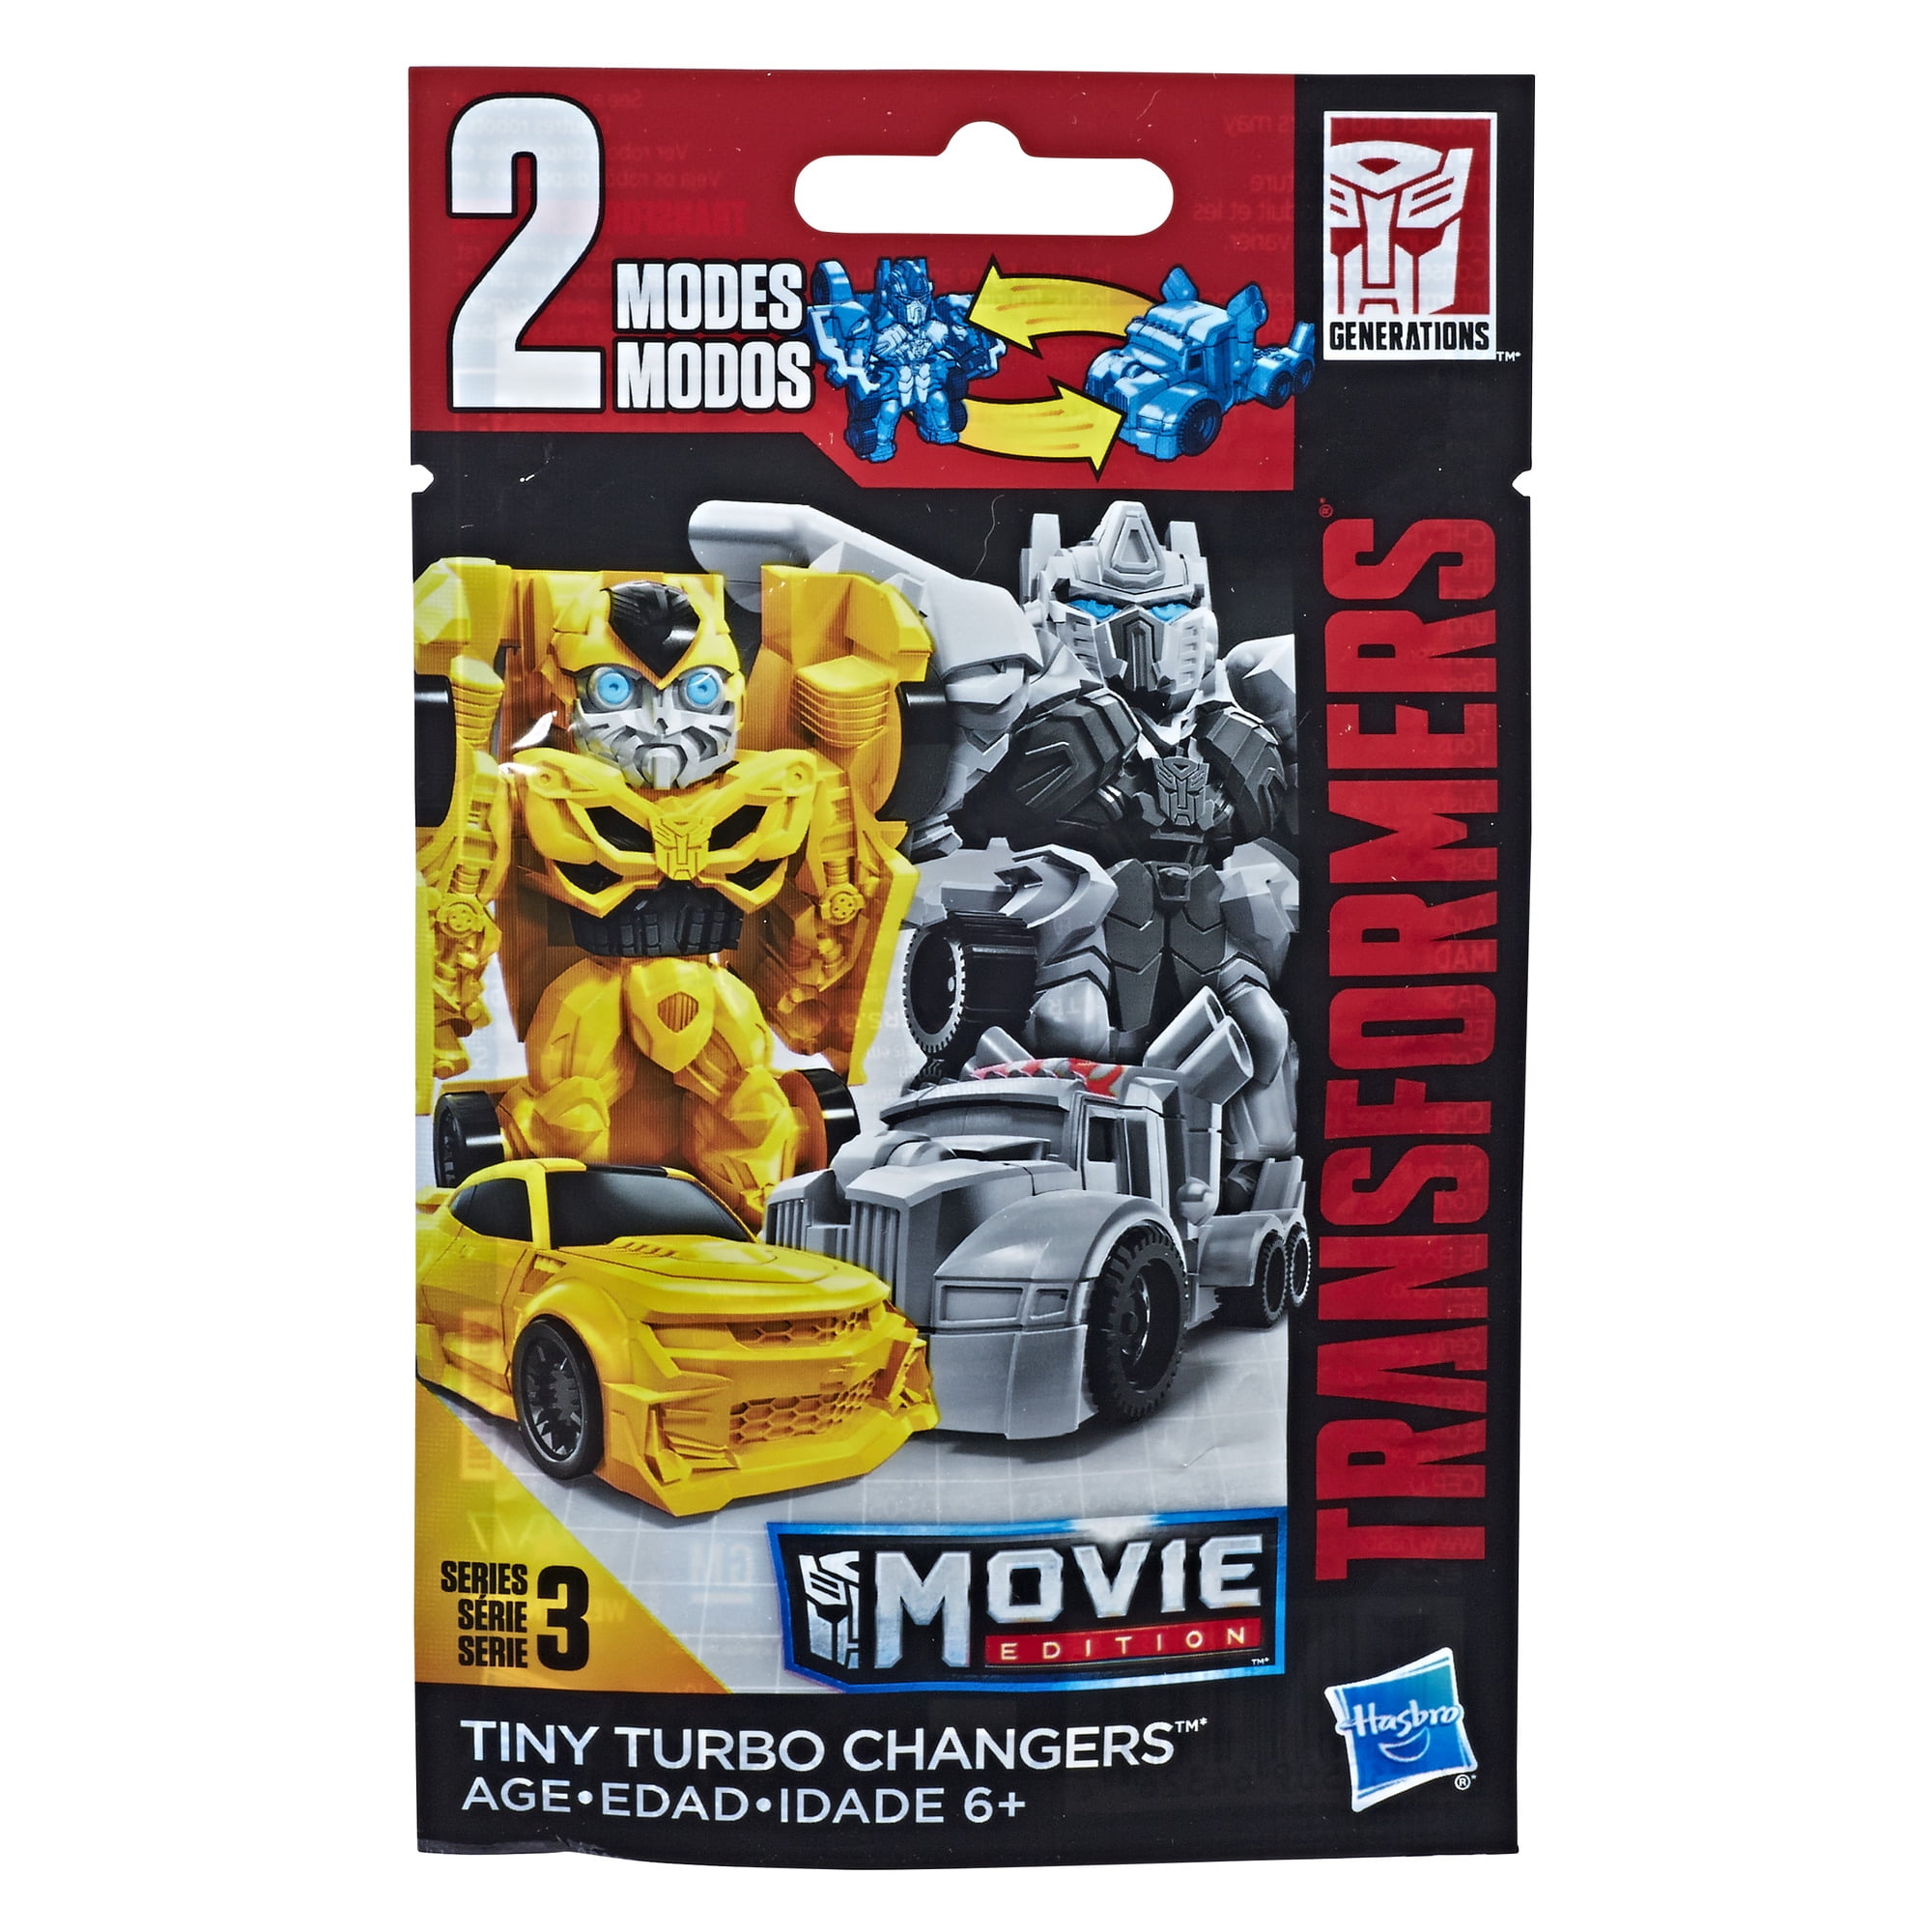 Hasbro Transformers Tiny Turbo Chargers Series 1 Choose Your Own 